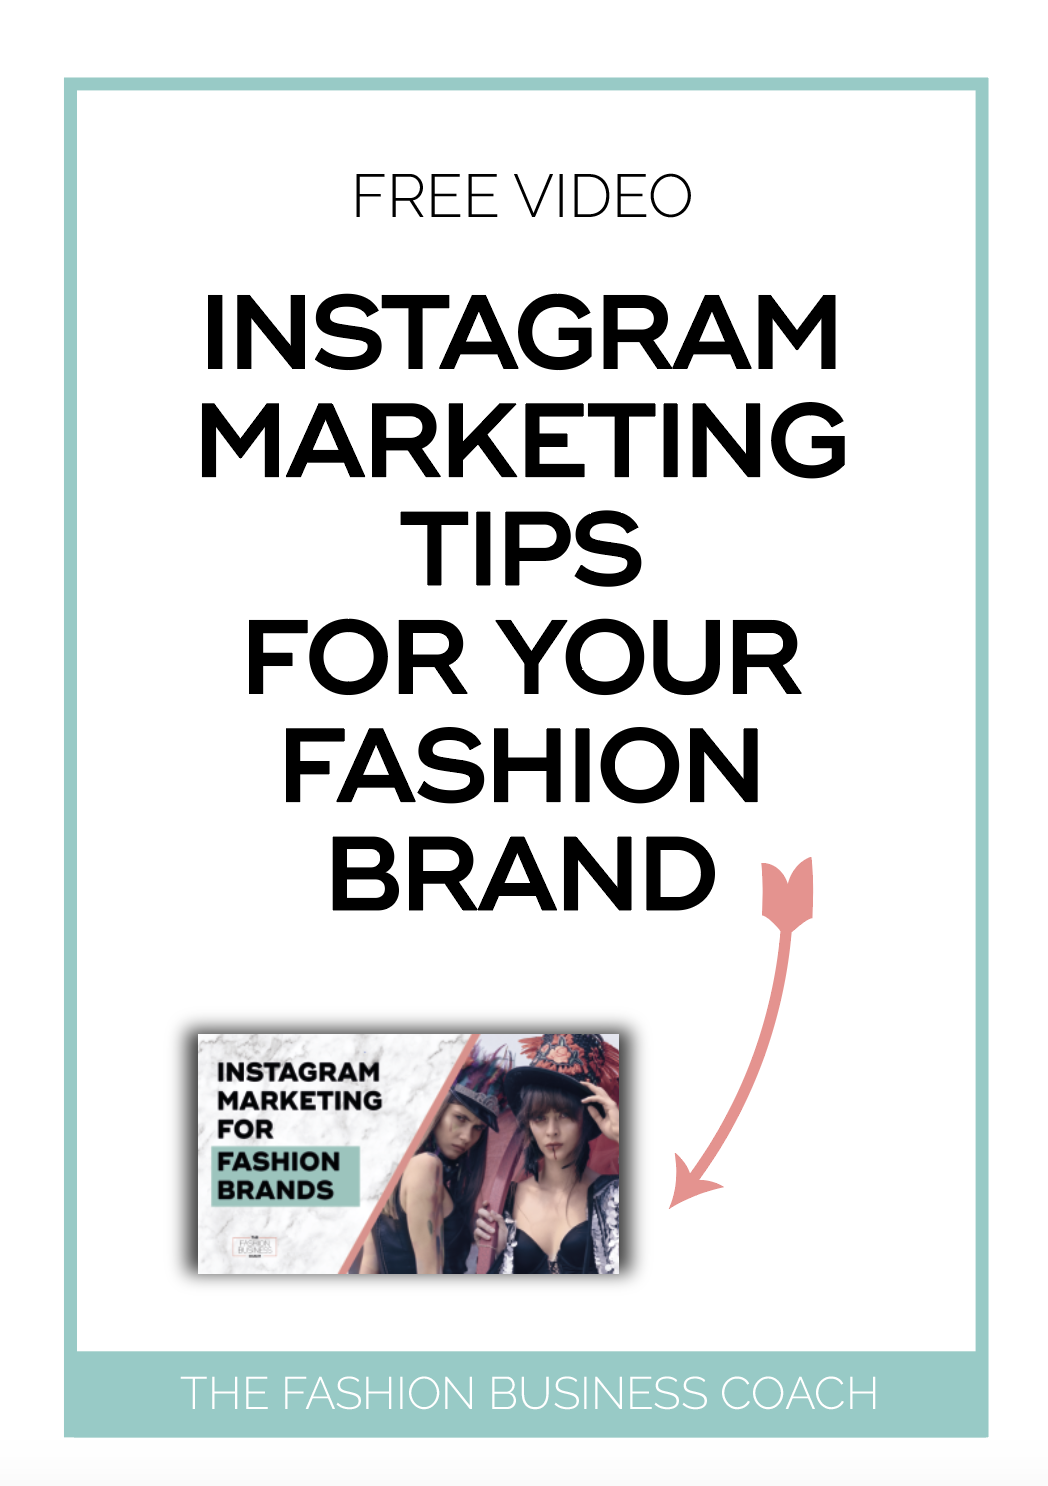 Instagram Marketing Tips for Your Fashion Brand 4.png